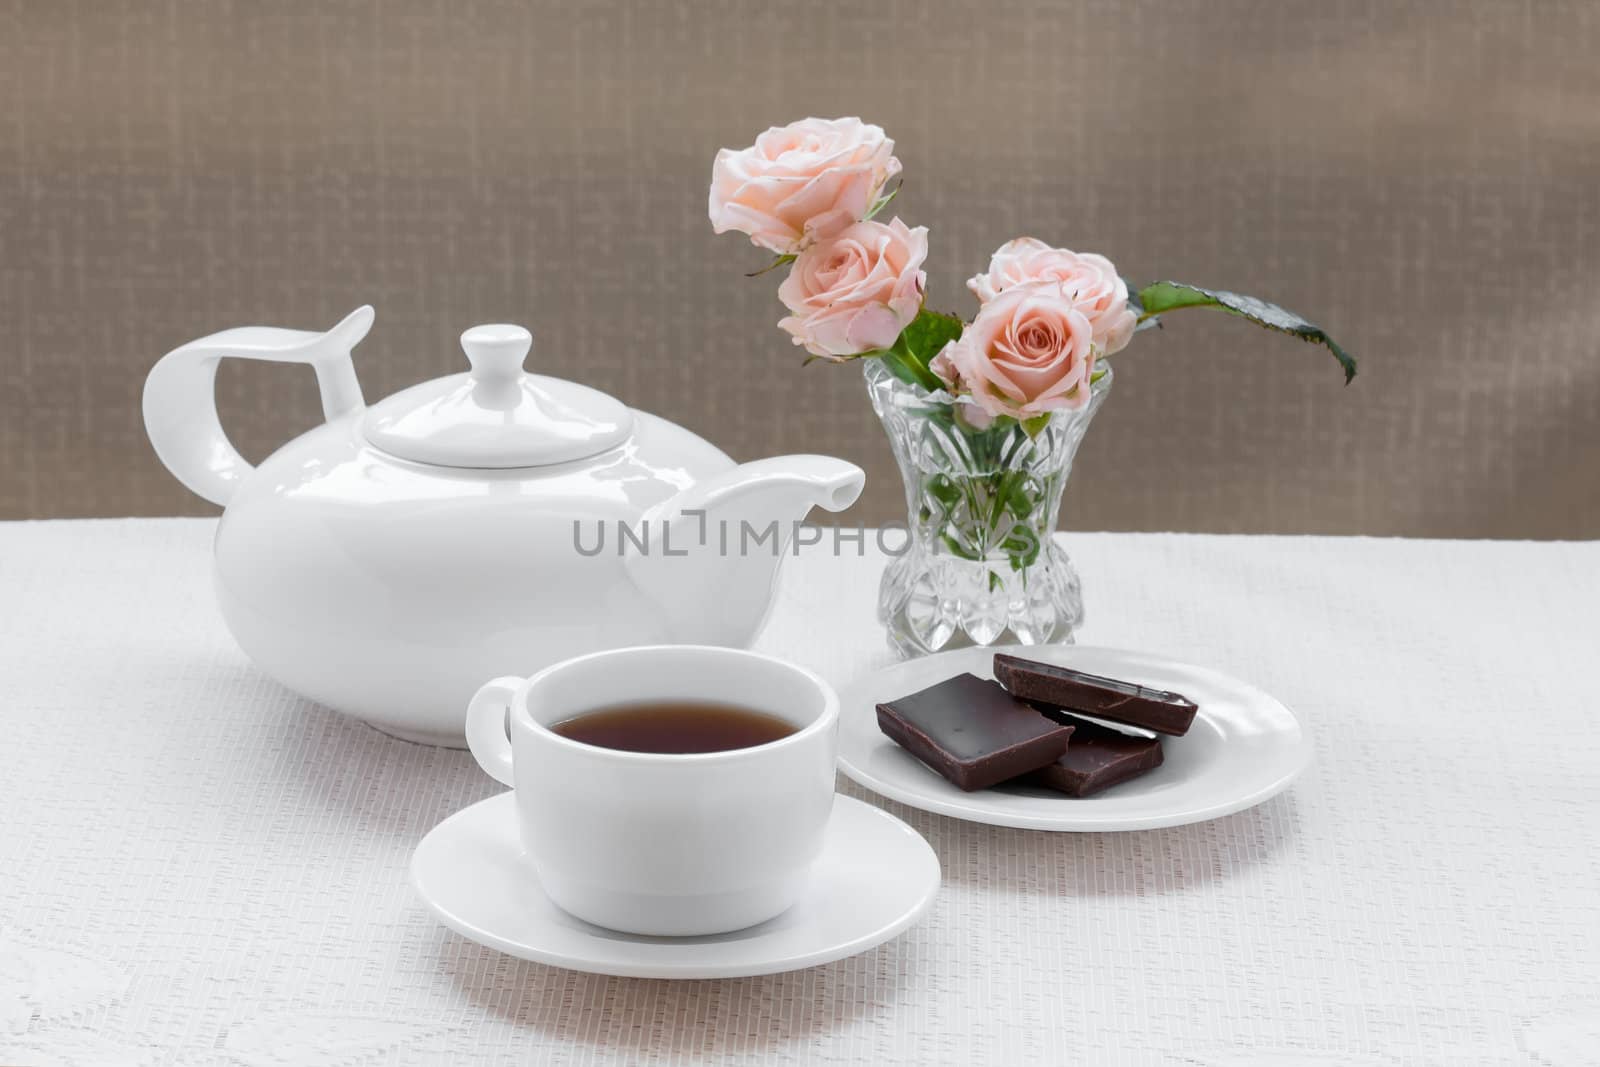 teapot, cup, roses, and chocolate on a plate